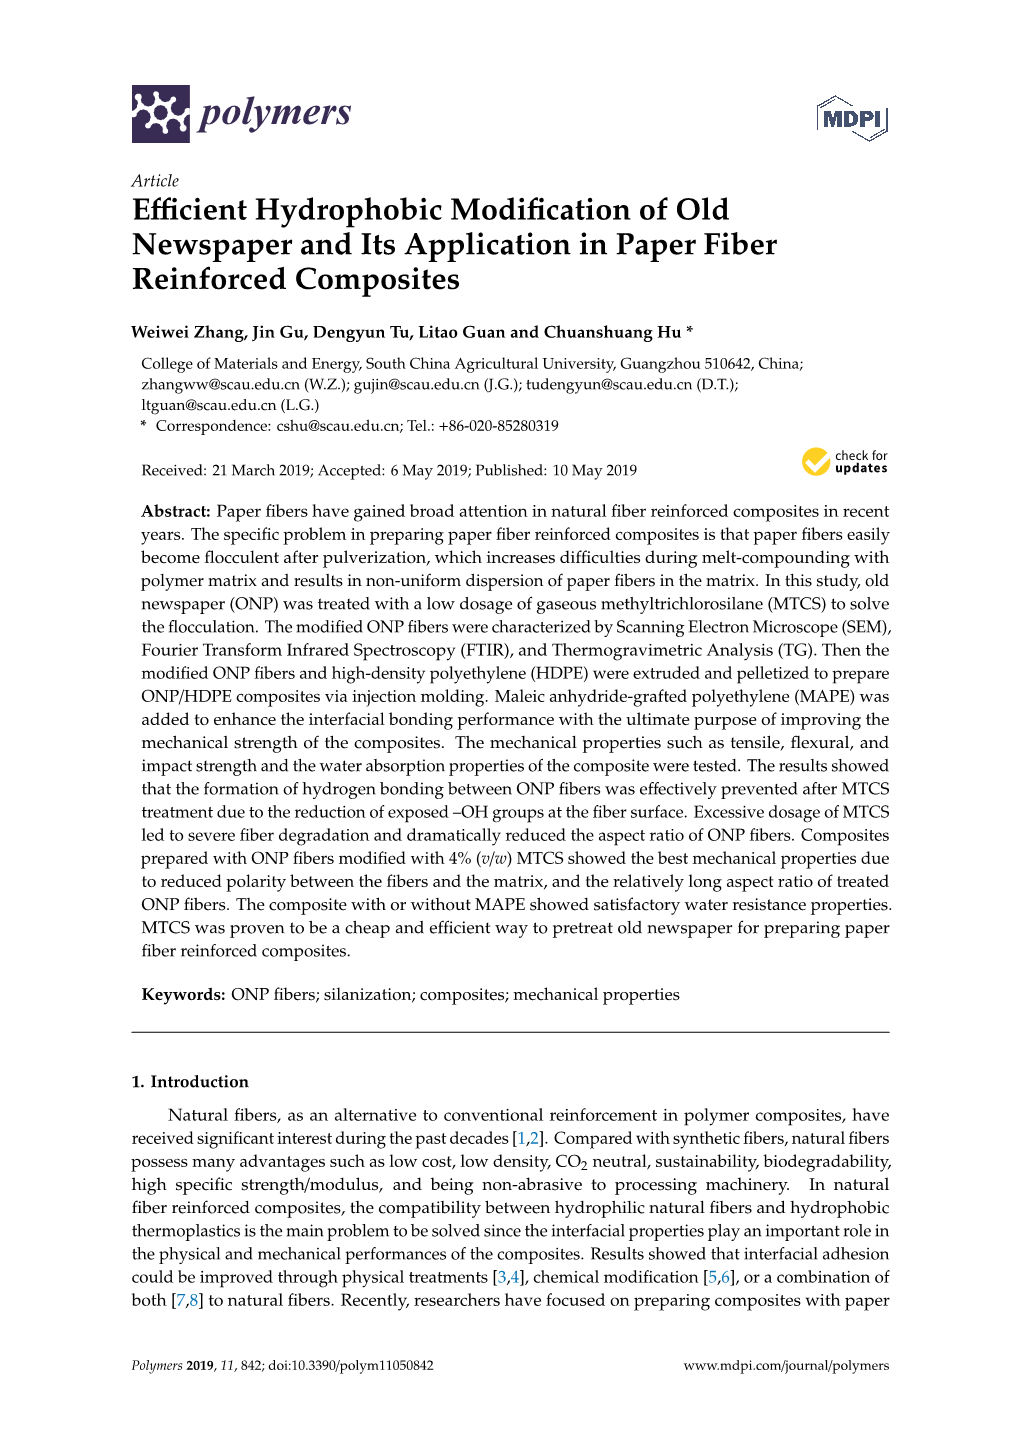 Efficient Hydrophobic Modification of Old Newspaper and Its Application